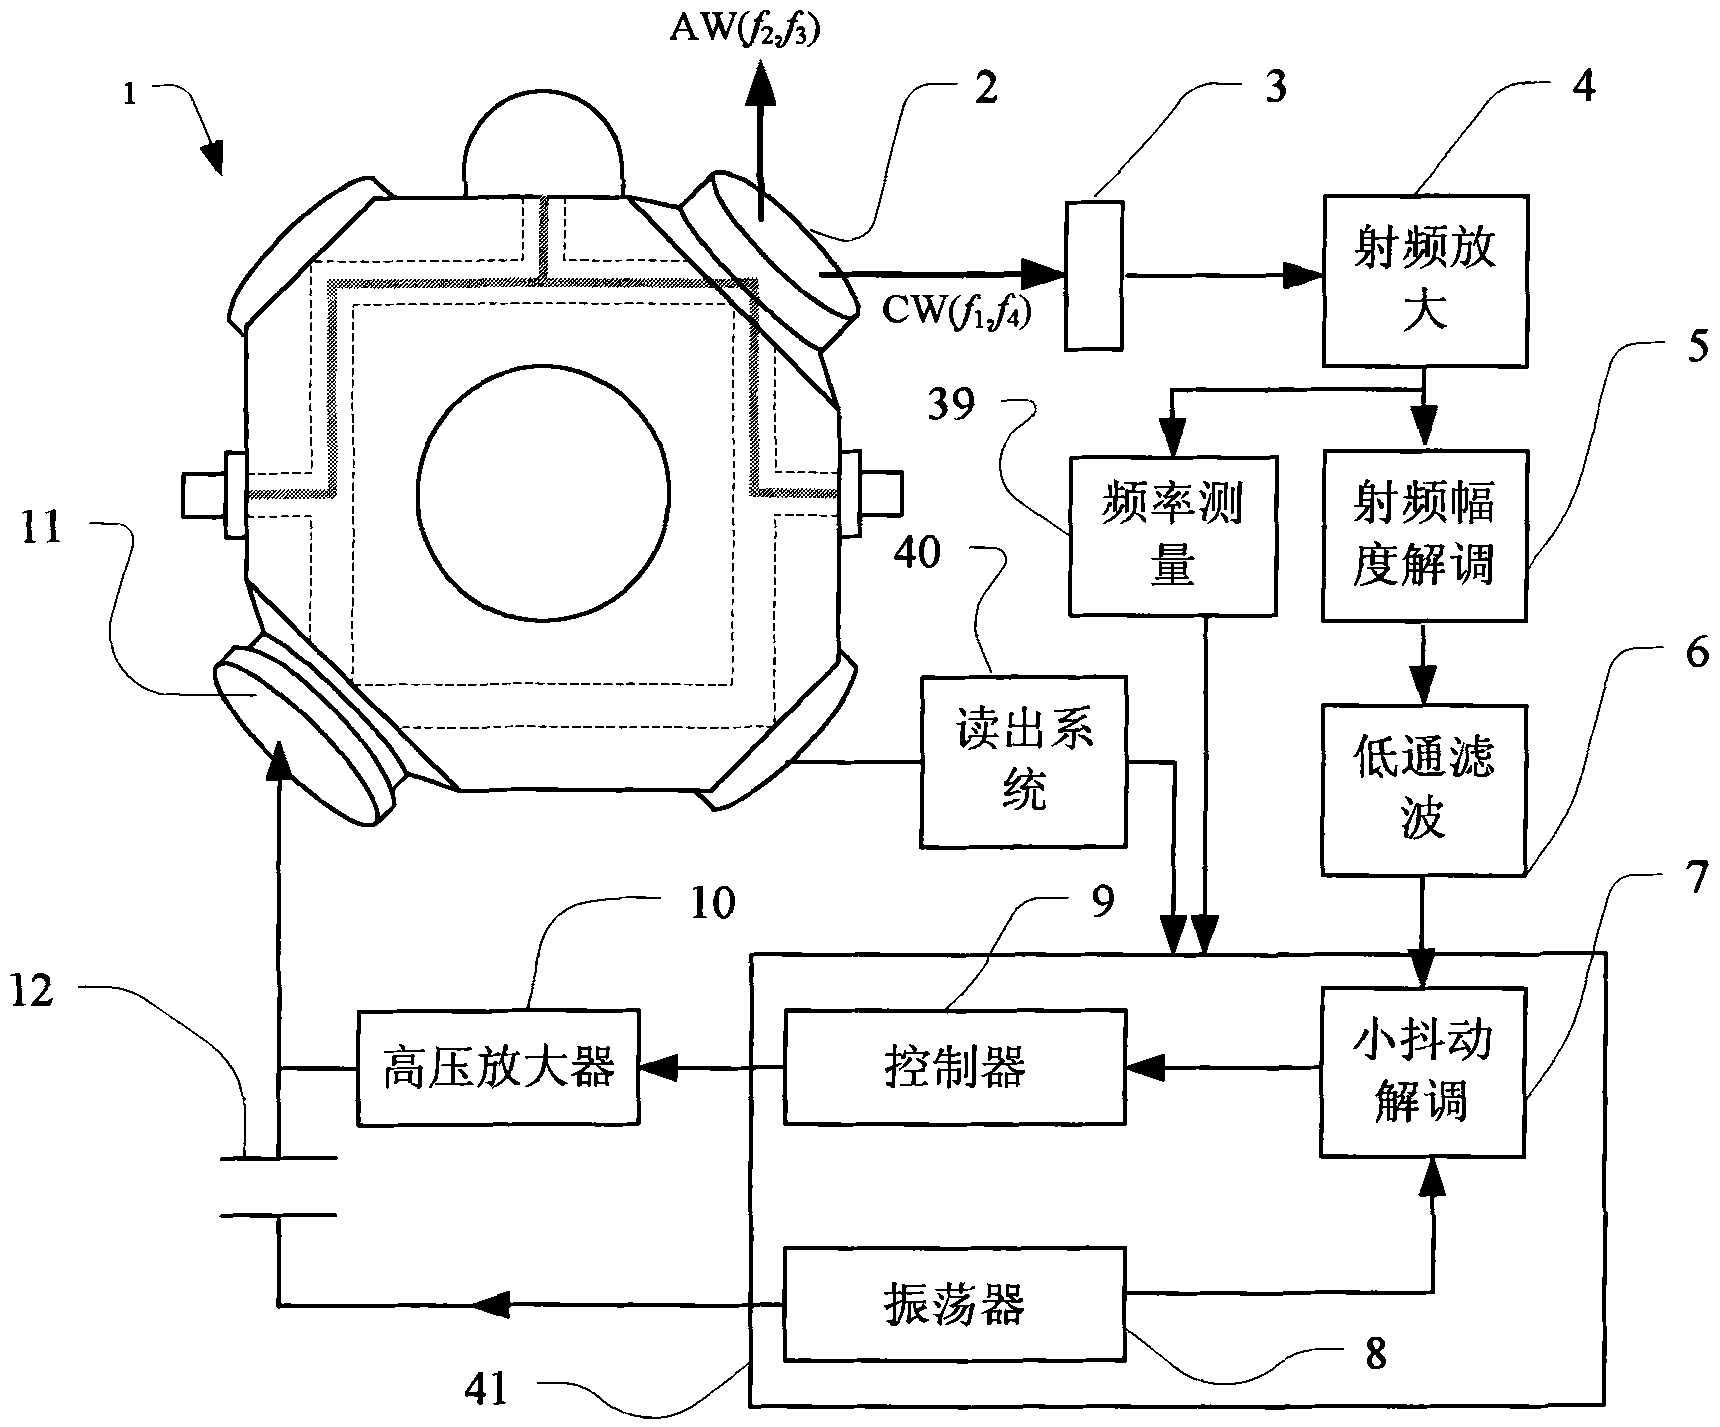 Small jitter frequency stabilization method of four-frequency laser gyro